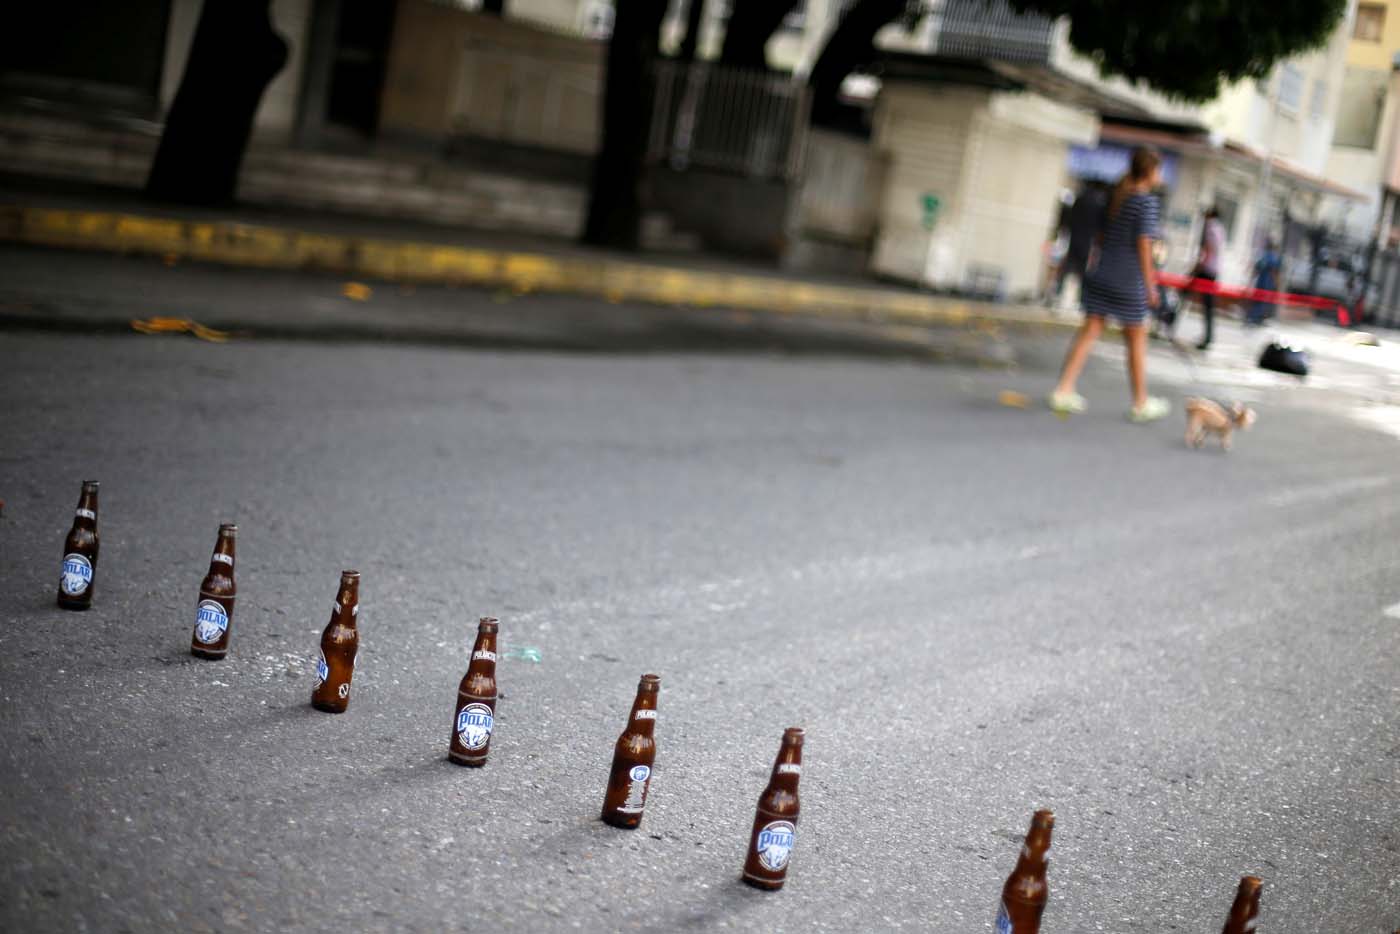 Beer bottles are seen placed on the street during a strike called to protest against Venezuelan President Nicolas Maduro's government in Caracas, Venezuela, July 20, 2017. REUTERS/Andres Martinez Casares